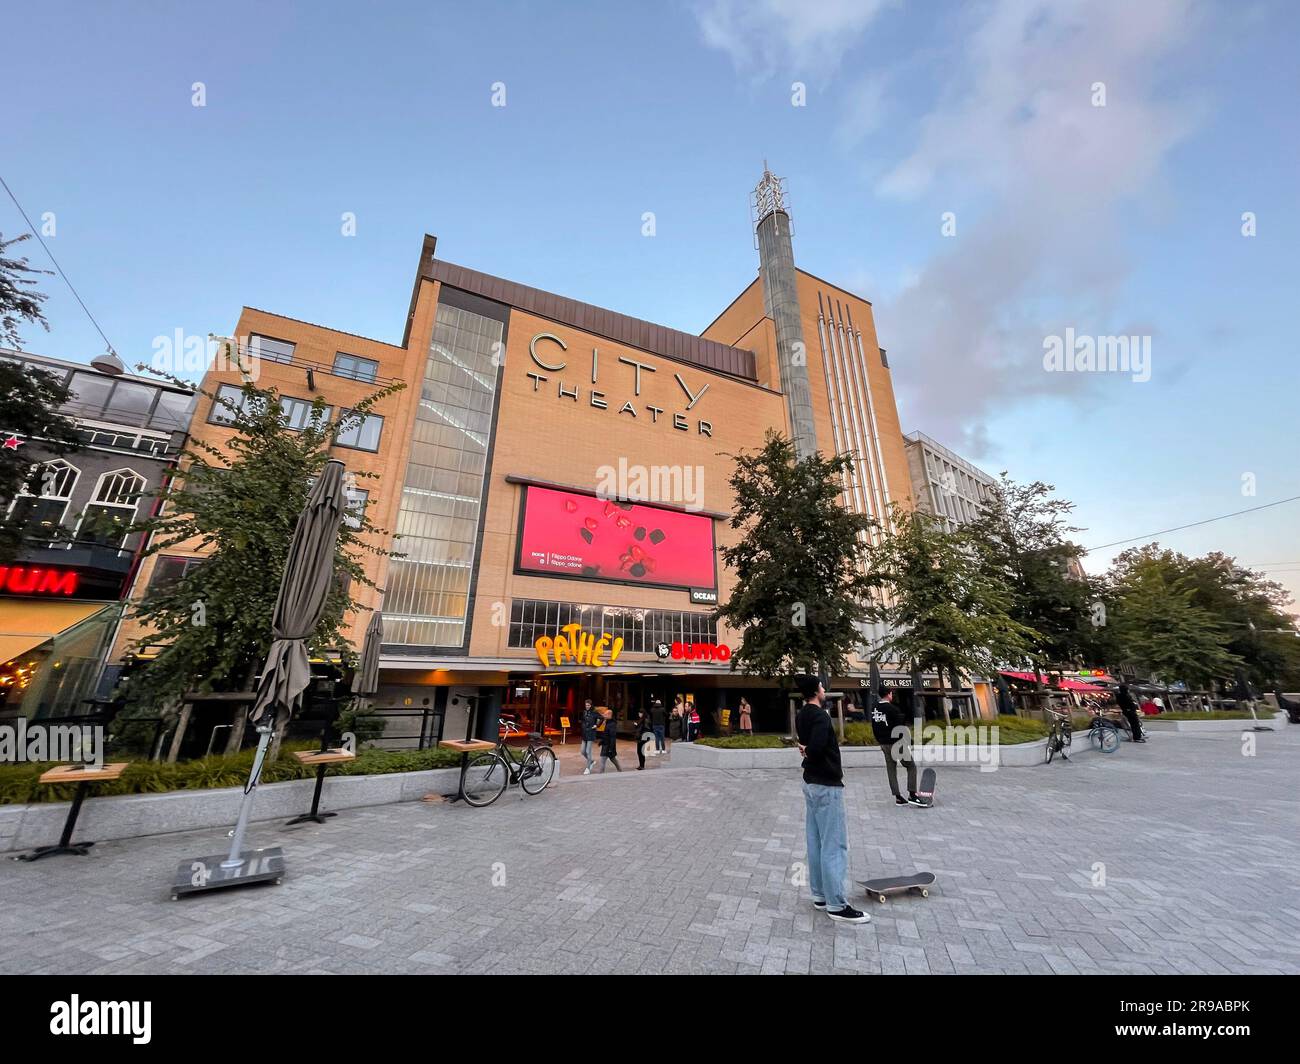 Amsterdam, NL - OCT 12, 2021: Exterior view of the City Theater building, built in art deco style in Amsterdam, NL. Stock Photo